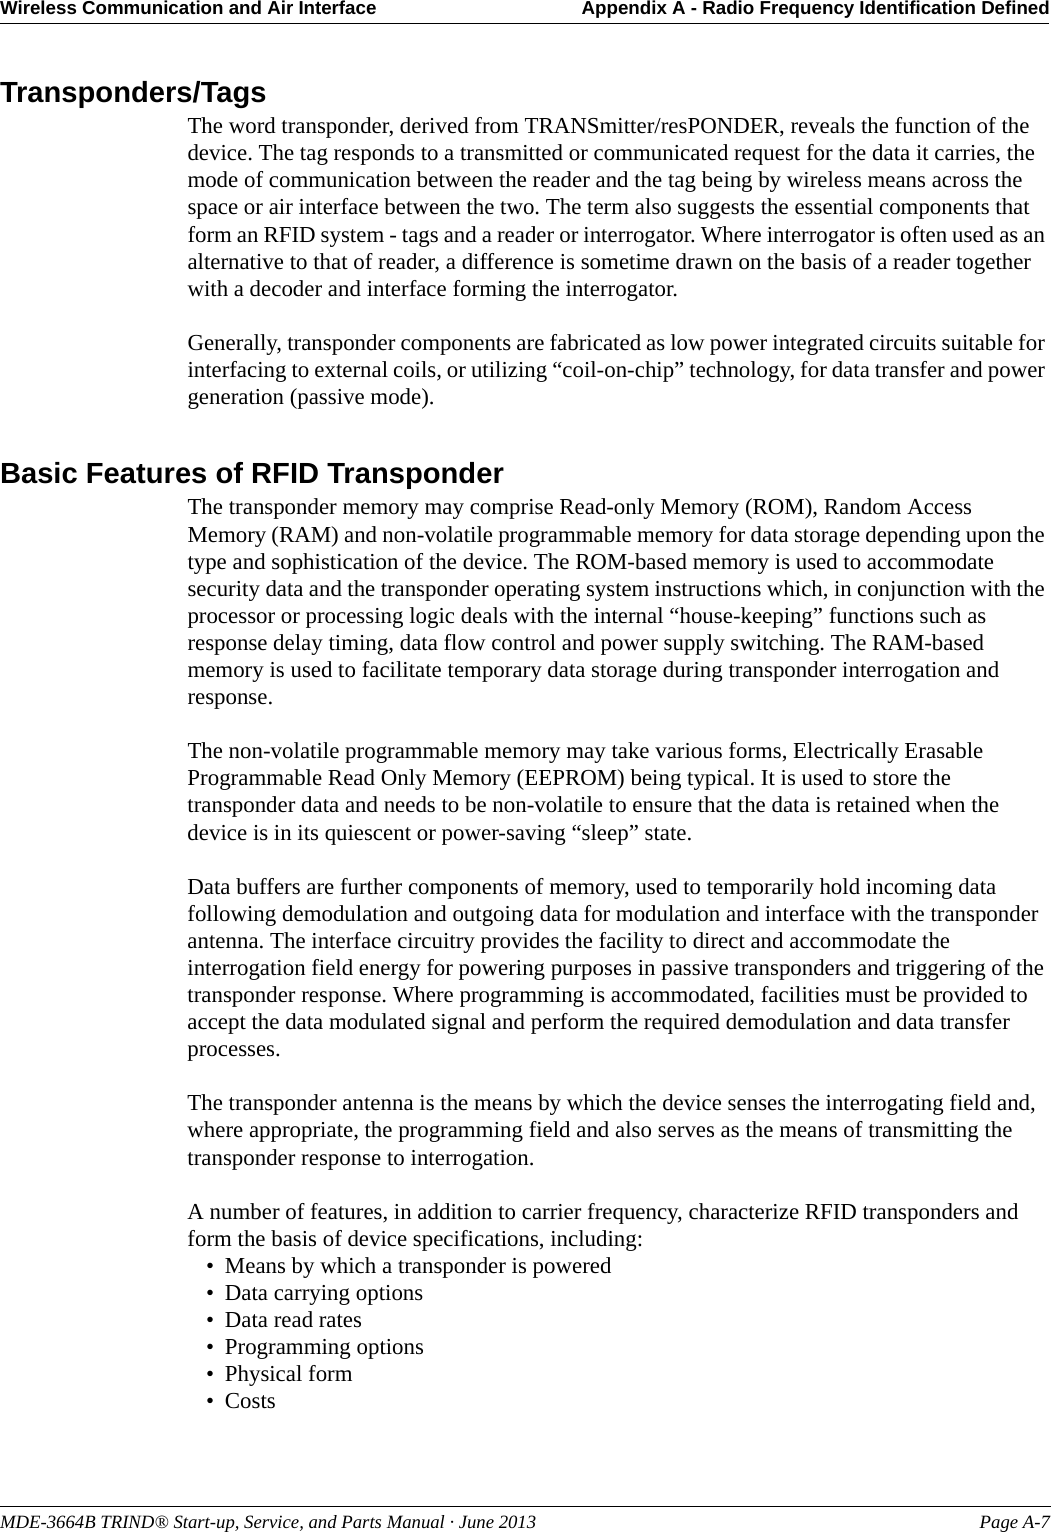 MDE-3664B TRIND® Start-up, Service, and Parts Manual · June 2013 Page A-7Wireless Communication and Air Interface Appendix A - Radio Frequency Identification DefinedTransponders/TagsThe word transponder, derived from TRANSmitter/resPONDER, reveals the function of the device. The tag responds to a transmitted or communicated request for the data it carries, the mode of communication between the reader and the tag being by wireless means across the space or air interface between the two. The term also suggests the essential components that form an RFID system - tags and a reader or interrogator. Where interrogator is often used as an alternative to that of reader, a difference is sometime drawn on the basis of a reader together with a decoder and interface forming the interrogator.Generally, transponder components are fabricated as low power integrated circuits suitable for interfacing to external coils, or utilizing “coil-on-chip” technology, for data transfer and power generation (passive mode).Basic Features of RFID TransponderThe transponder memory may comprise Read-only Memory (ROM), Random Access Memory (RAM) and non-volatile programmable memory for data storage depending upon the type and sophistication of the device. The ROM-based memory is used to accommodate security data and the transponder operating system instructions which, in conjunction with the processor or processing logic deals with the internal “house-keeping” functions such as response delay timing, data flow control and power supply switching. The RAM-based memory is used to facilitate temporary data storage during transponder interrogation and response.The non-volatile programmable memory may take various forms, Electrically Erasable Programmable Read Only Memory (EEPROM) being typical. It is used to store the transponder data and needs to be non-volatile to ensure that the data is retained when the device is in its quiescent or power-saving “sleep” state.Data buffers are further components of memory, used to temporarily hold incoming data following demodulation and outgoing data for modulation and interface with the transponder antenna. The interface circuitry provides the facility to direct and accommodate the interrogation field energy for powering purposes in passive transponders and triggering of the transponder response. Where programming is accommodated, facilities must be provided to accept the data modulated signal and perform the required demodulation and data transfer processes.The transponder antenna is the means by which the device senses the interrogating field and, where appropriate, the programming field and also serves as the means of transmitting the transponder response to interrogation.A number of features, in addition to carrier frequency, characterize RFID transponders and form the basis of device specifications, including: • Means by which a transponder is powered • Data carrying options • Data read rates • Programming options • Physical form •Costs 